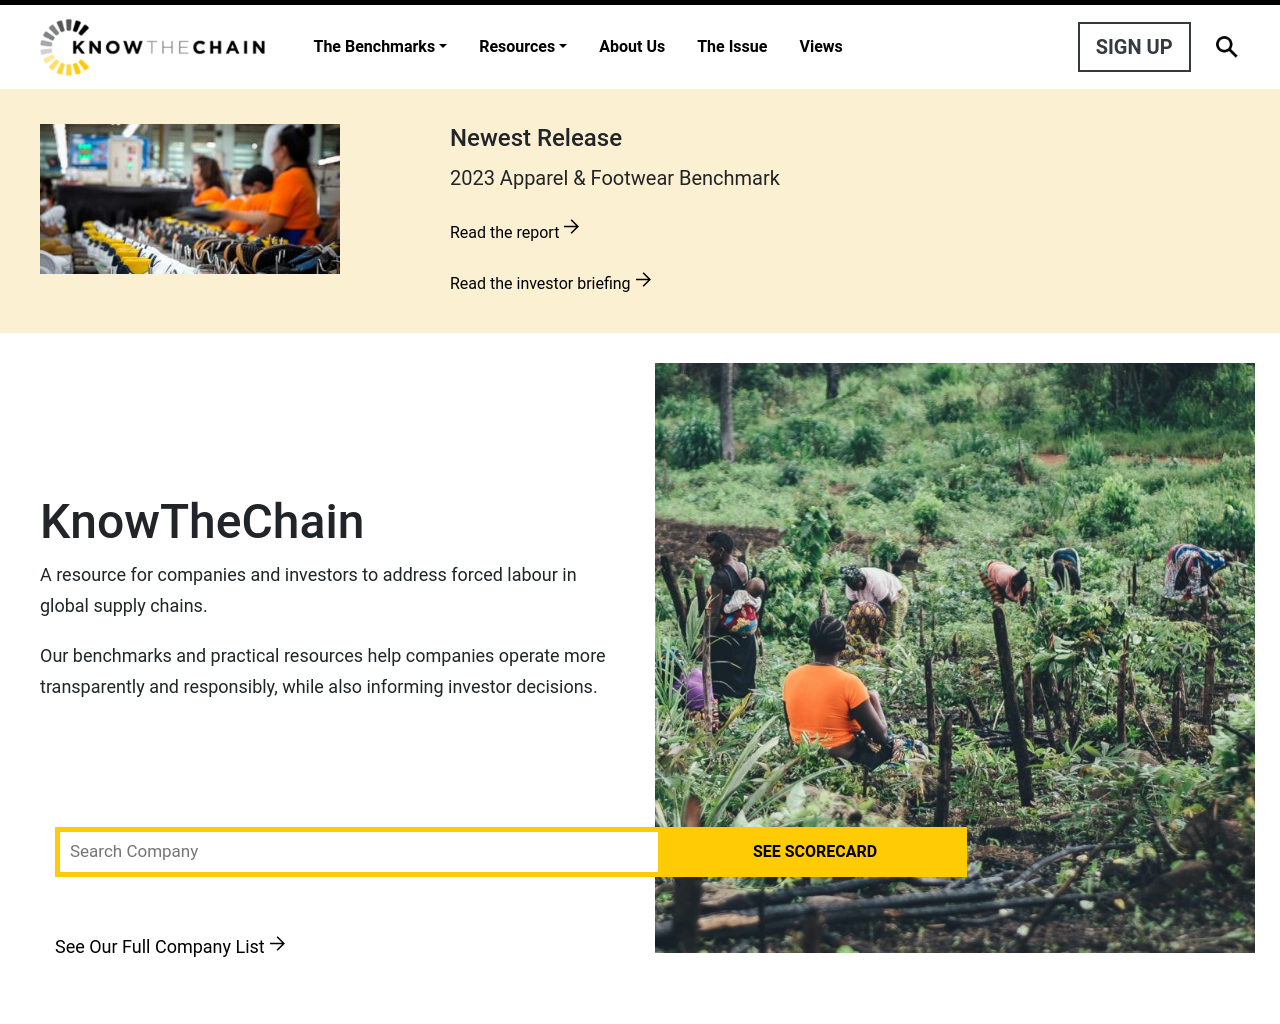 knowthechain.org